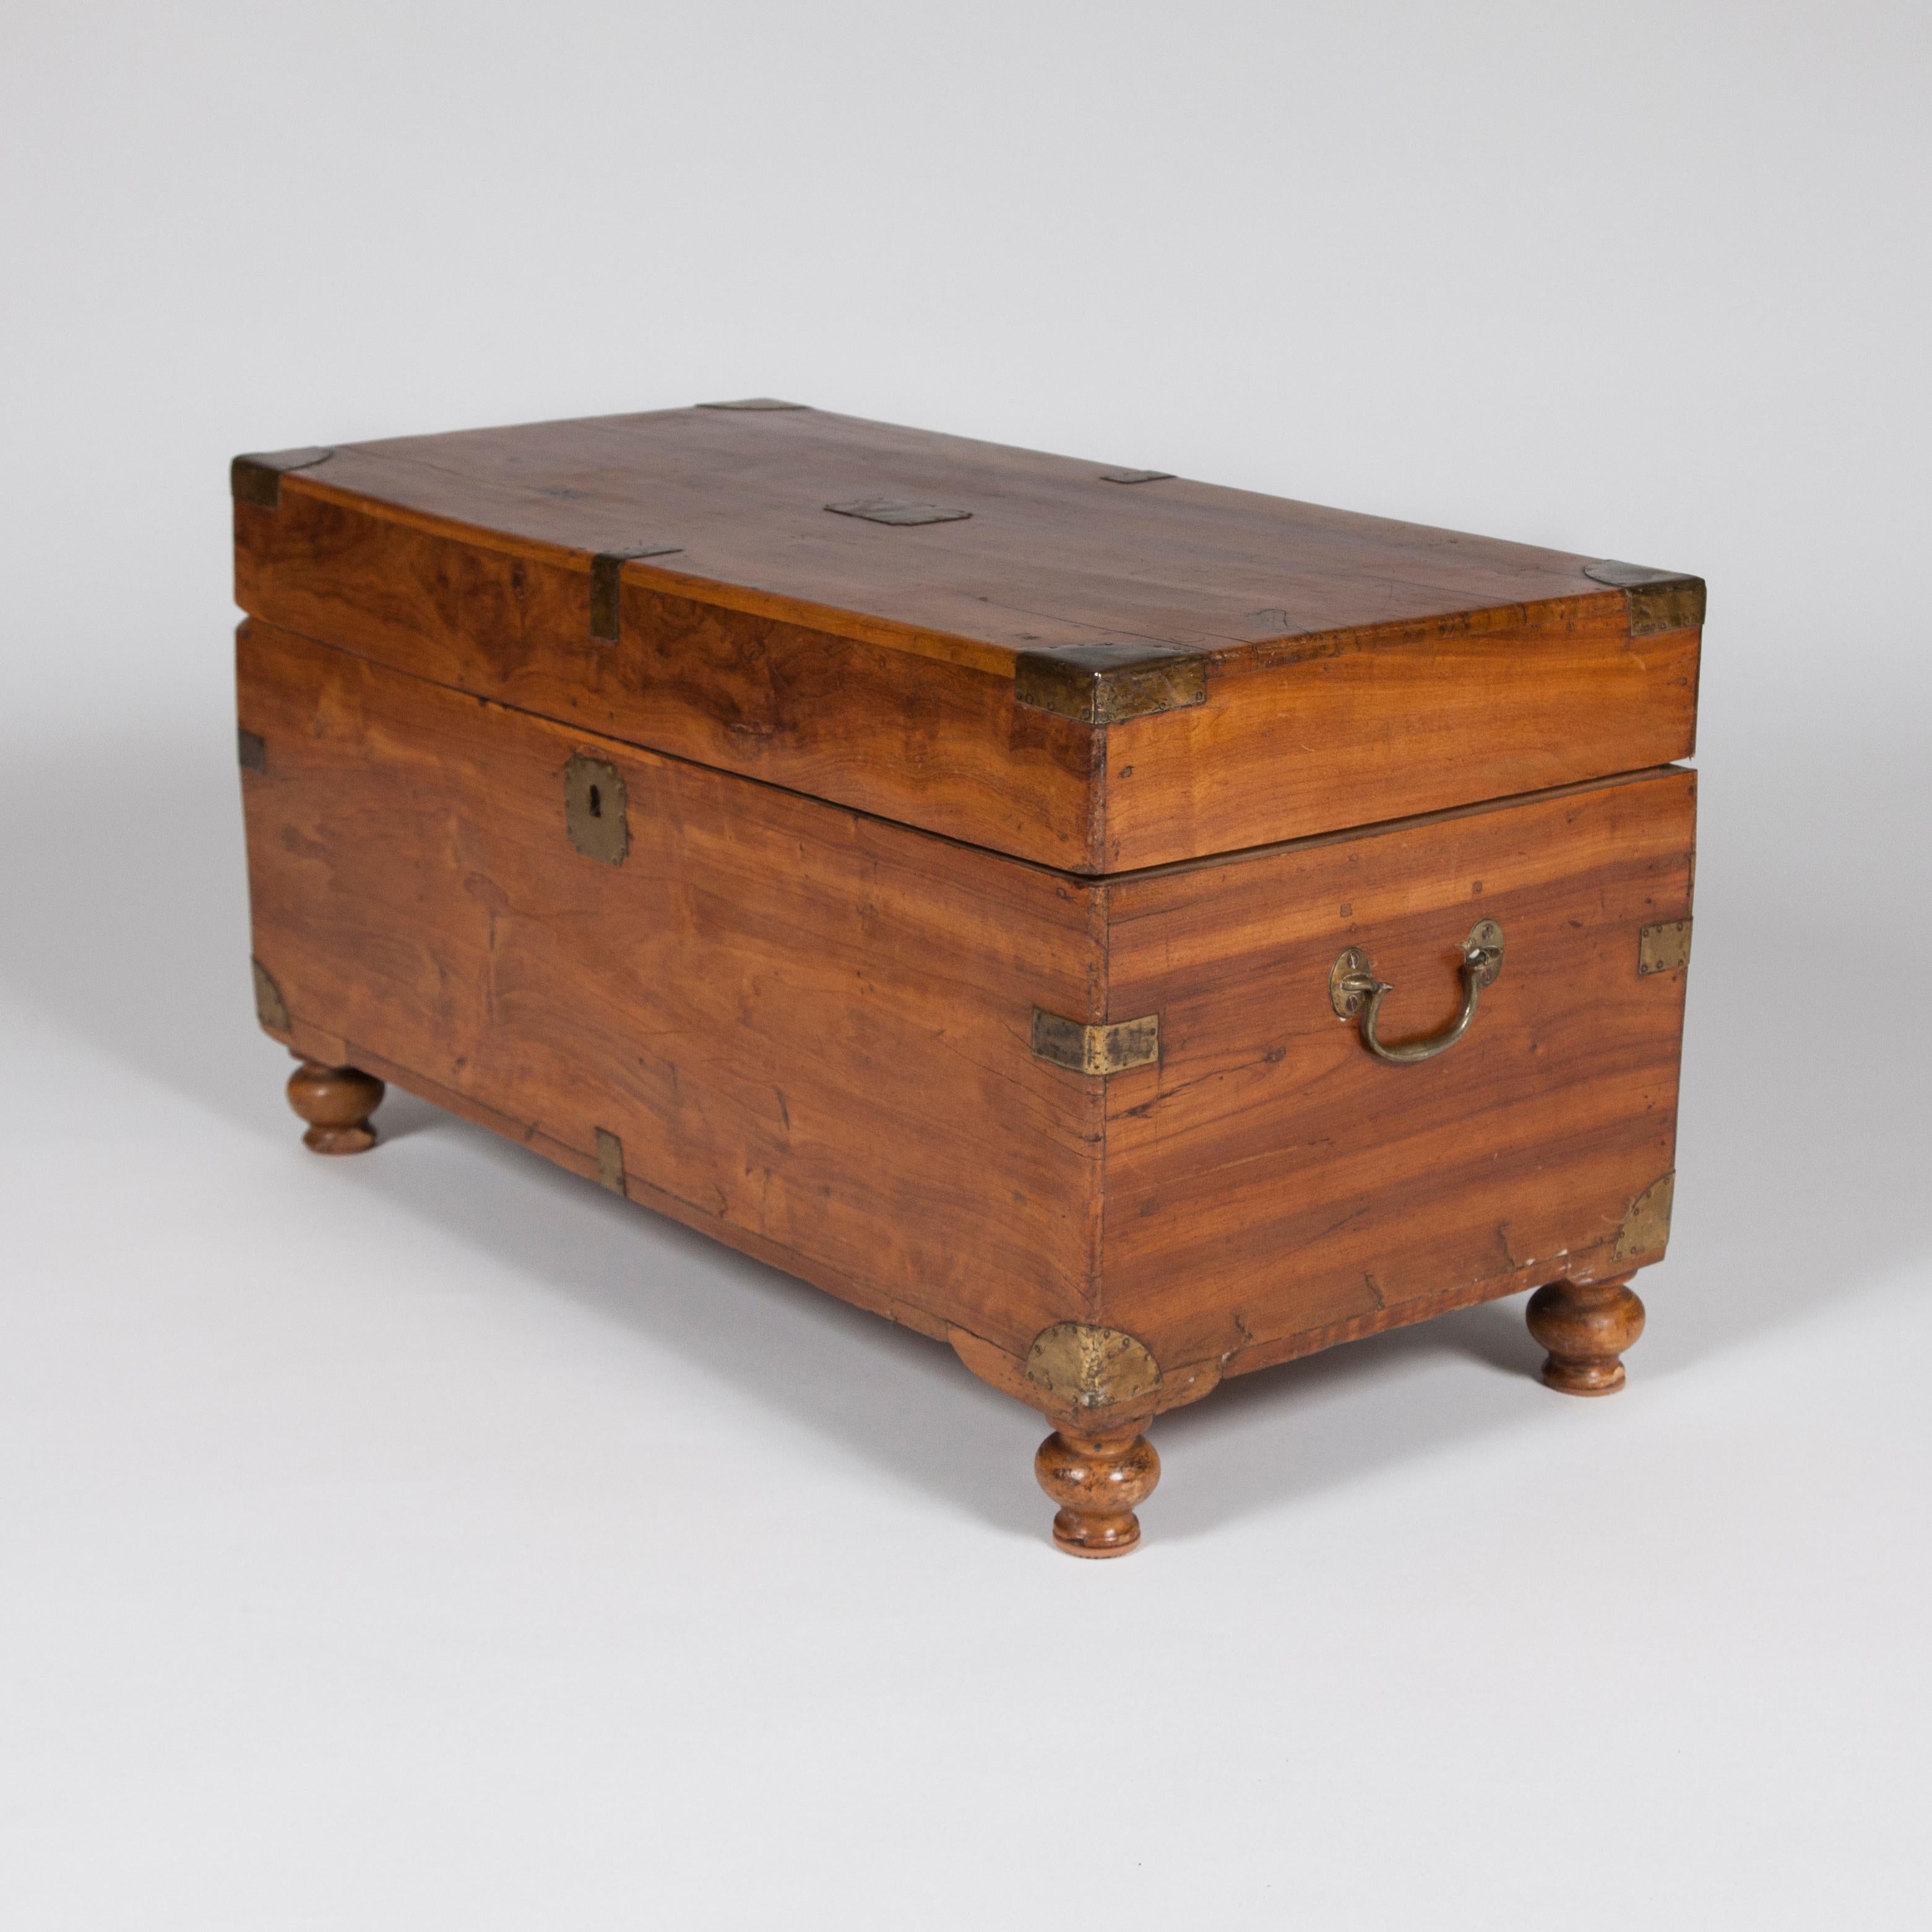 A late 19th century Victorian camphor wood trunk with hinged lid, brass handles and mounts on turned feet.